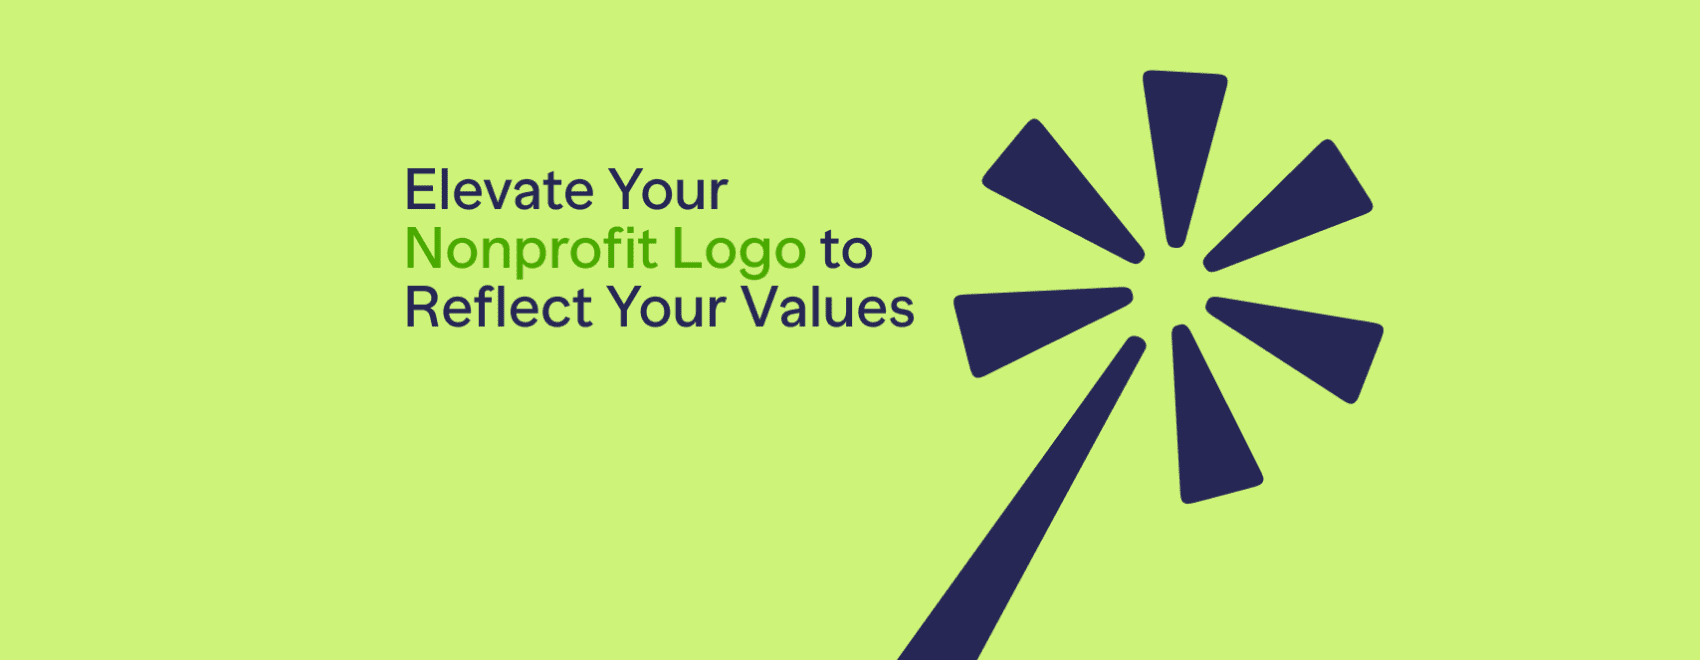 Elevate Your Nonprofit Logo to Reflect Your Values